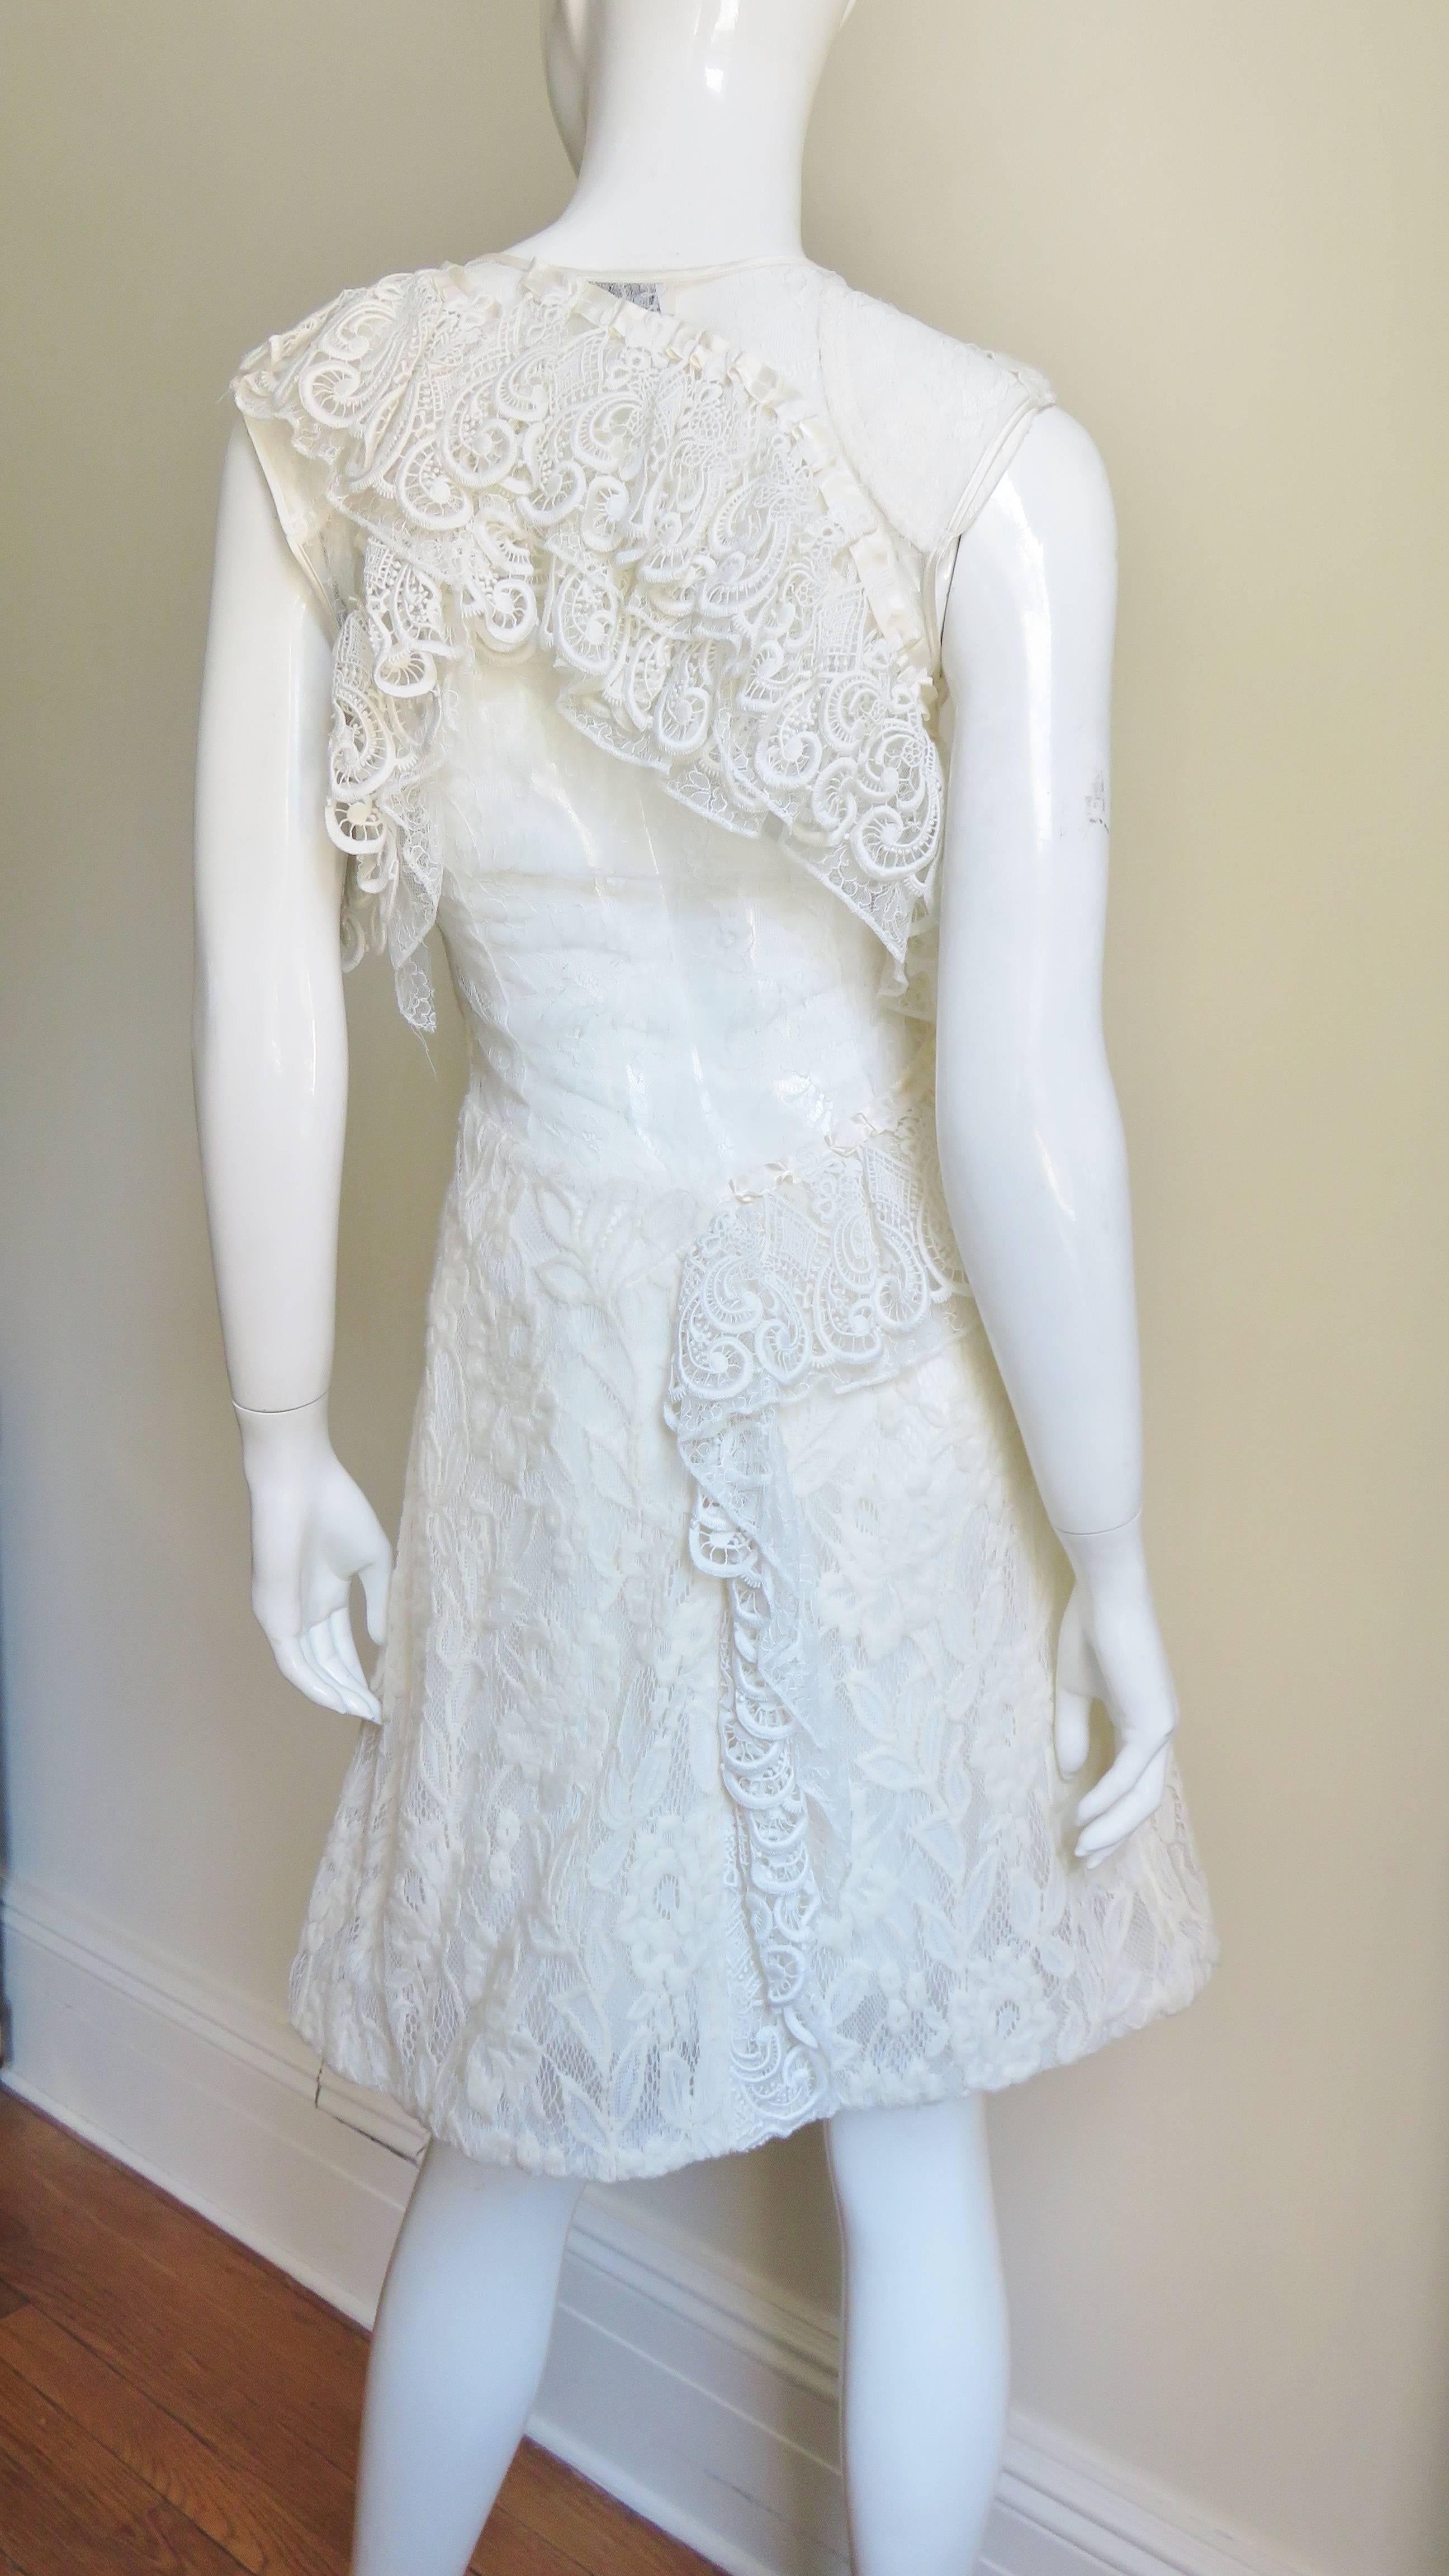 Nina Ricci Lace Dress with Cut out Back For Sale 3